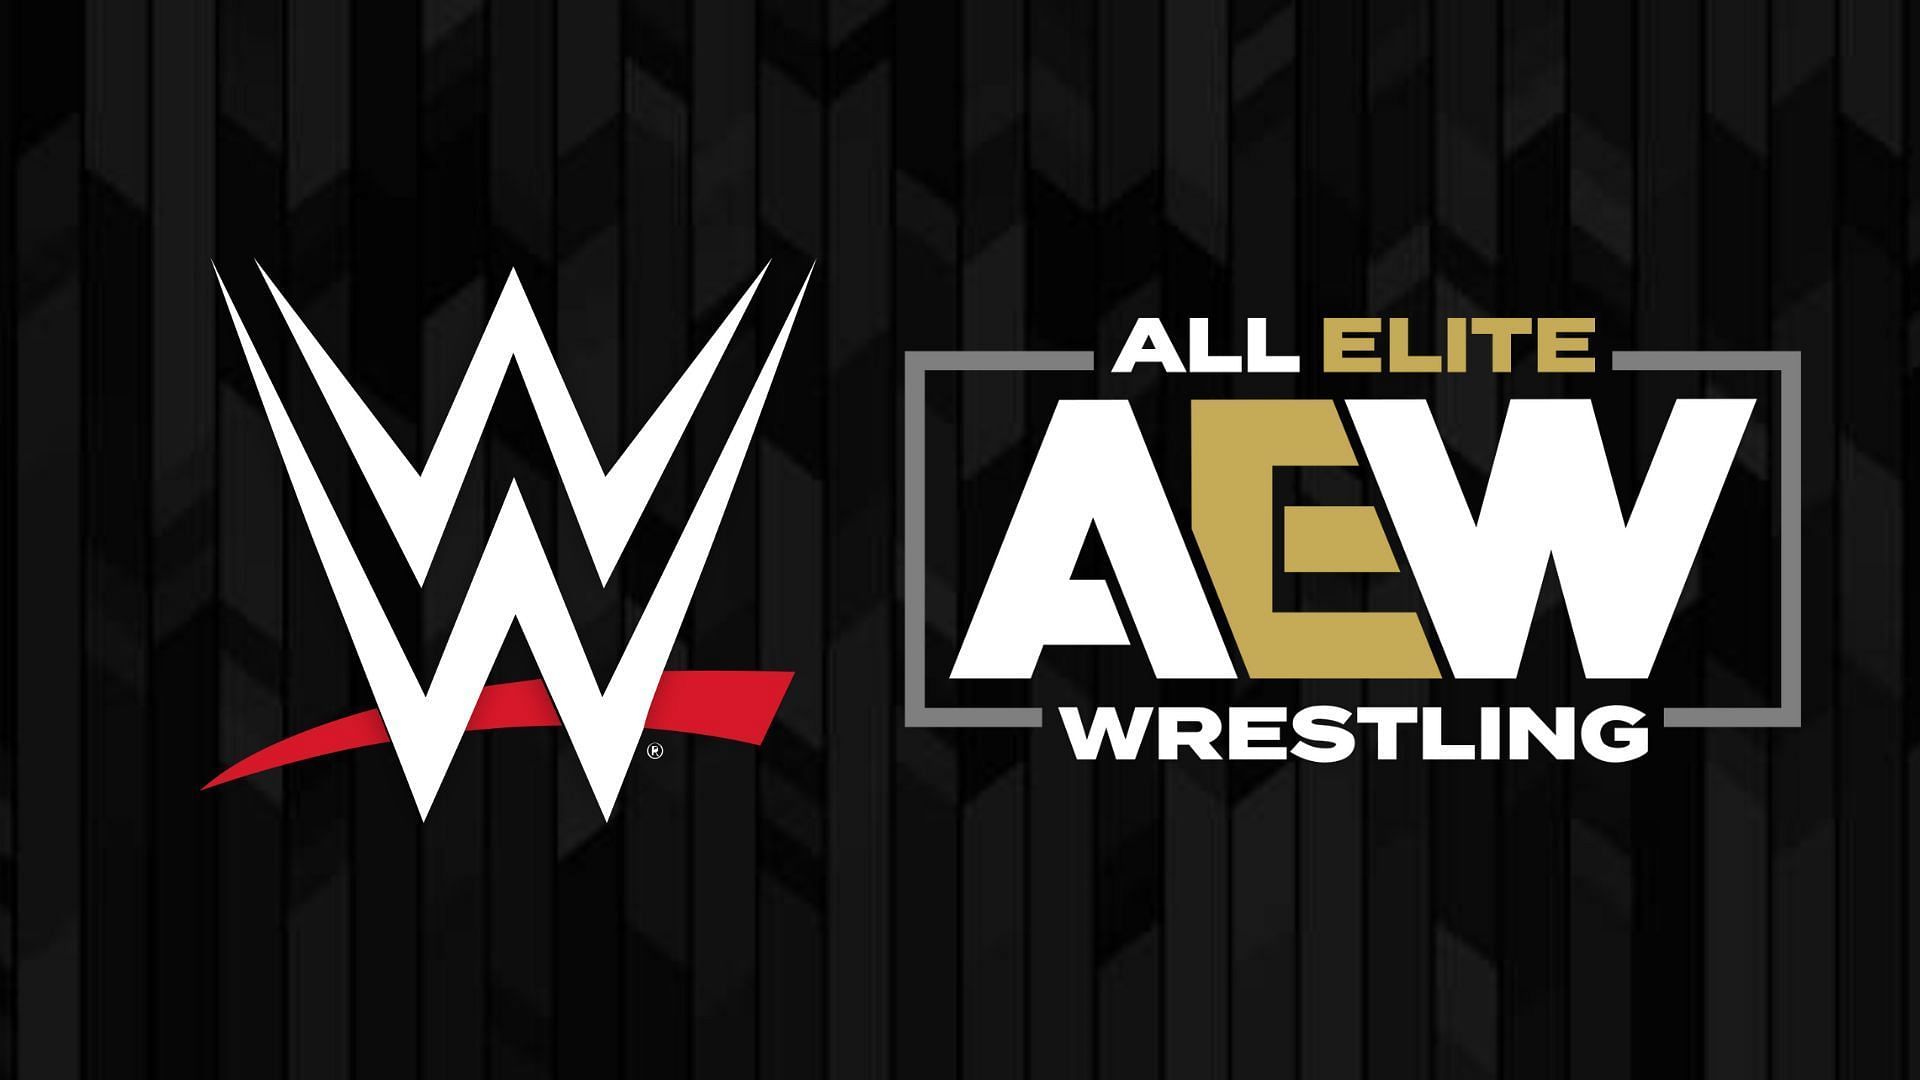 A former champion in WWE could move to AEW.